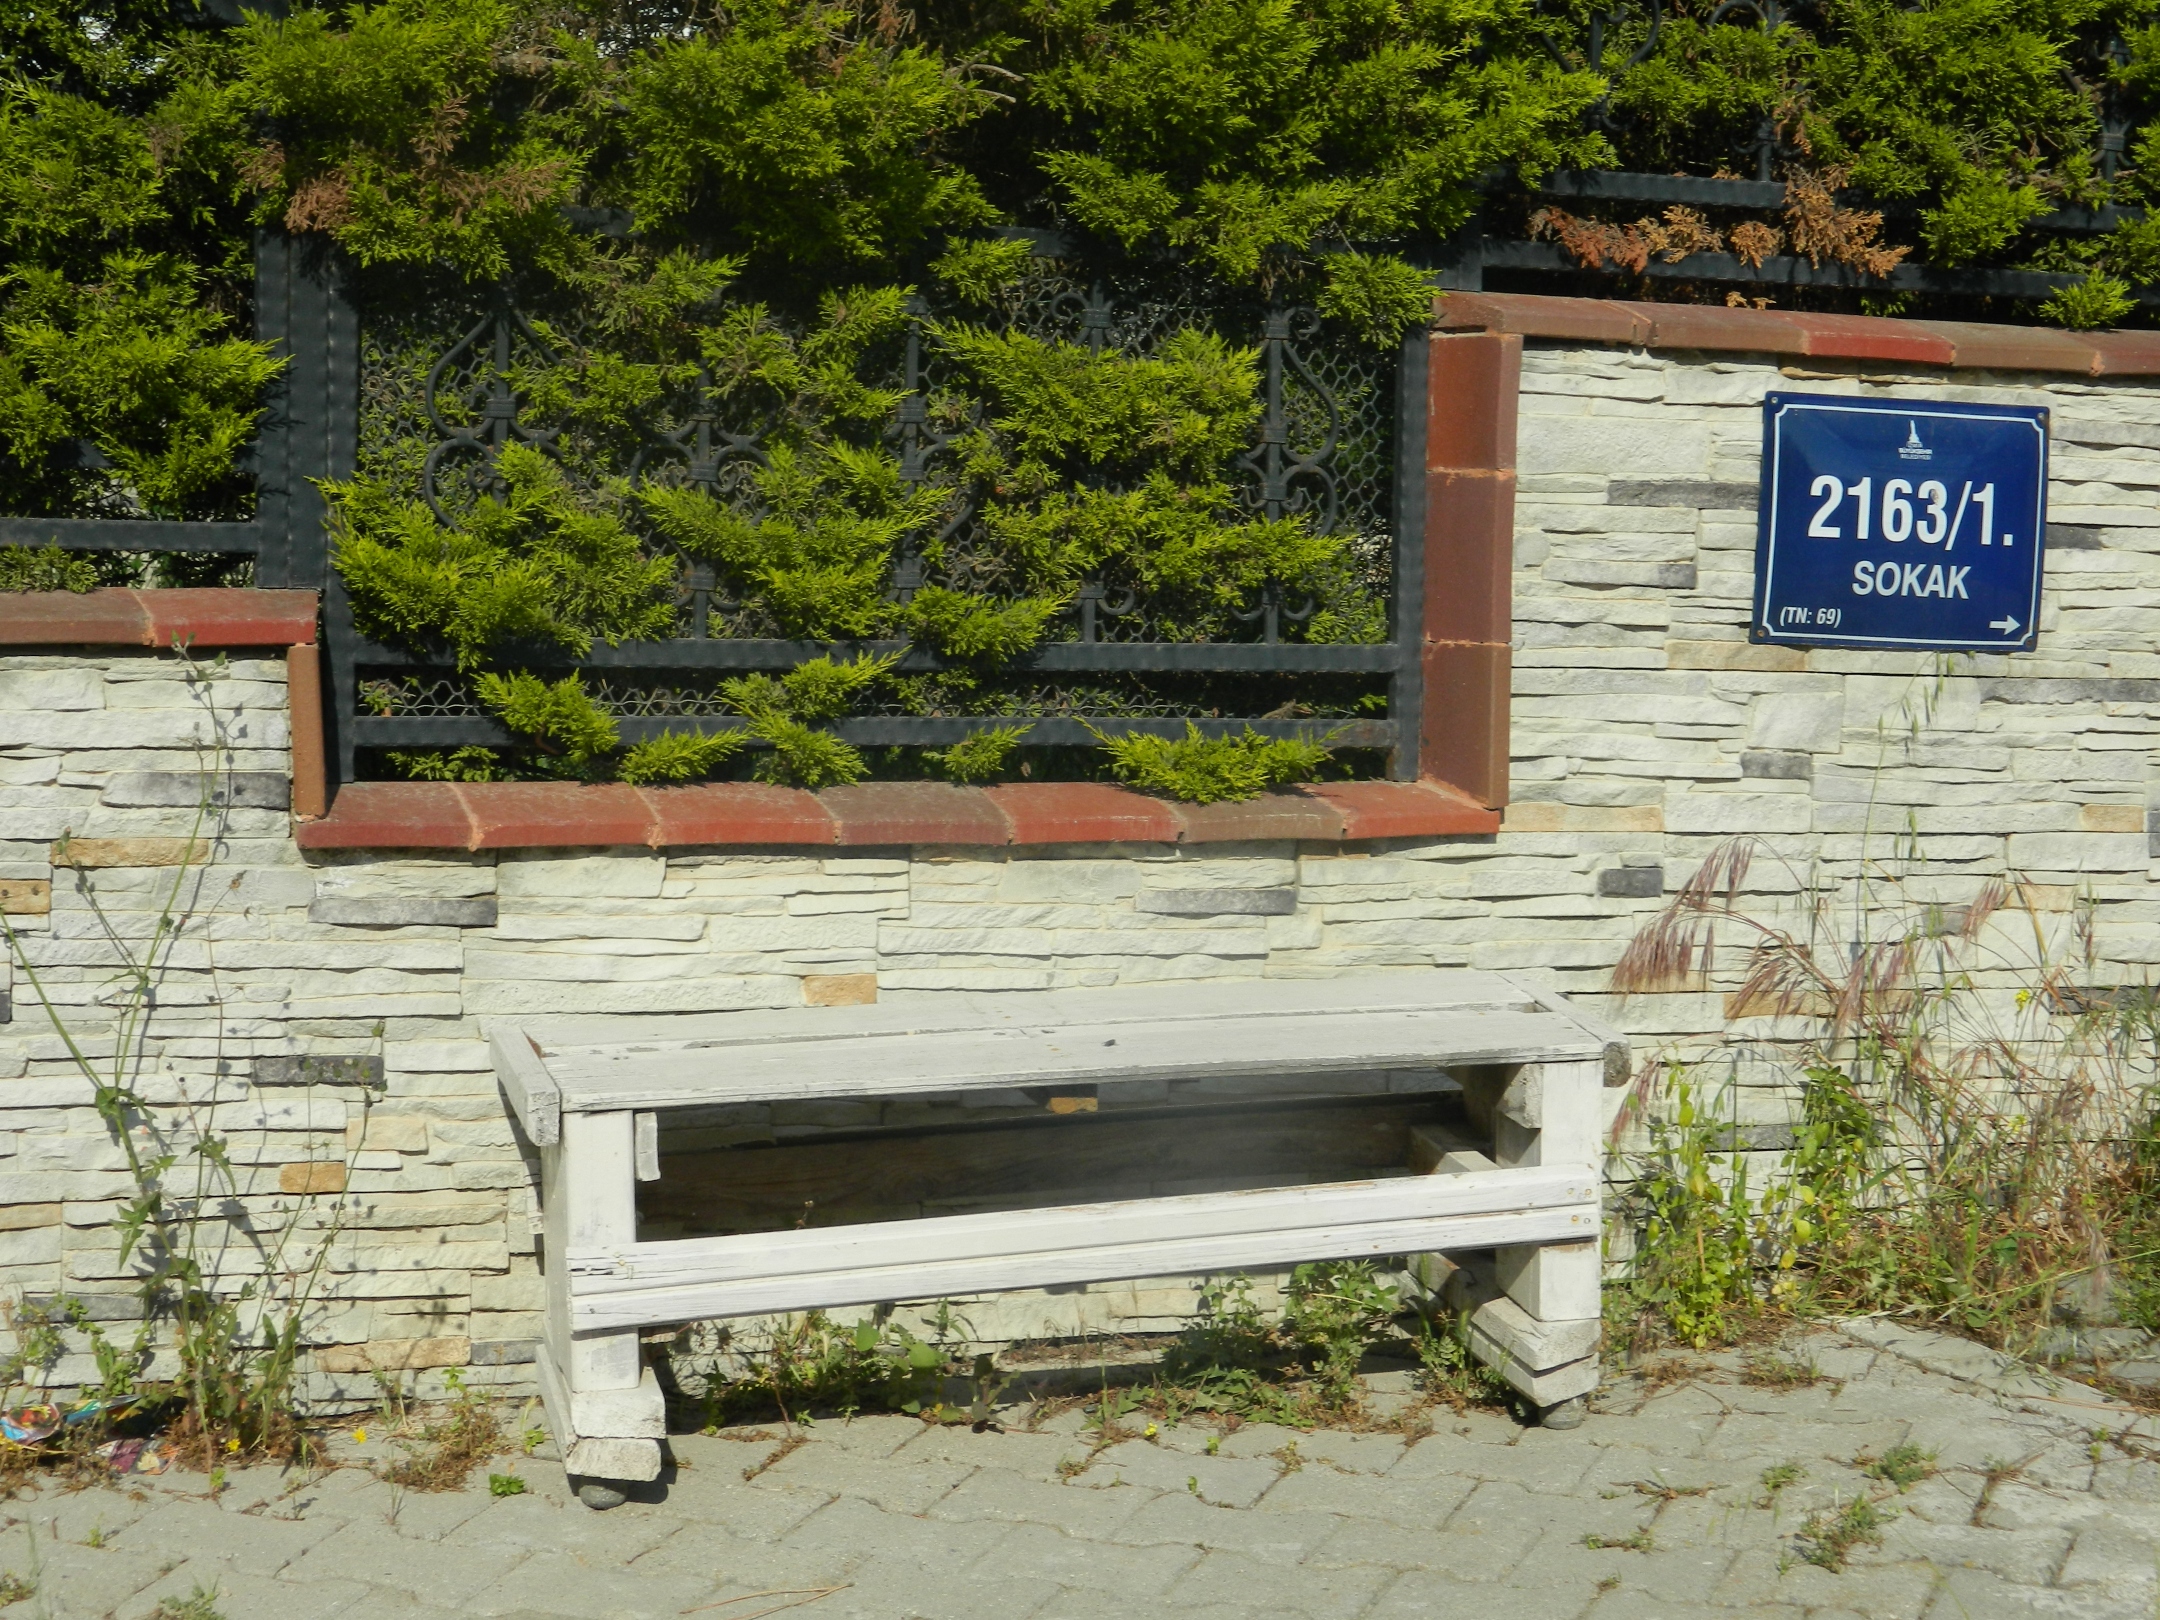 Bench in the street photo